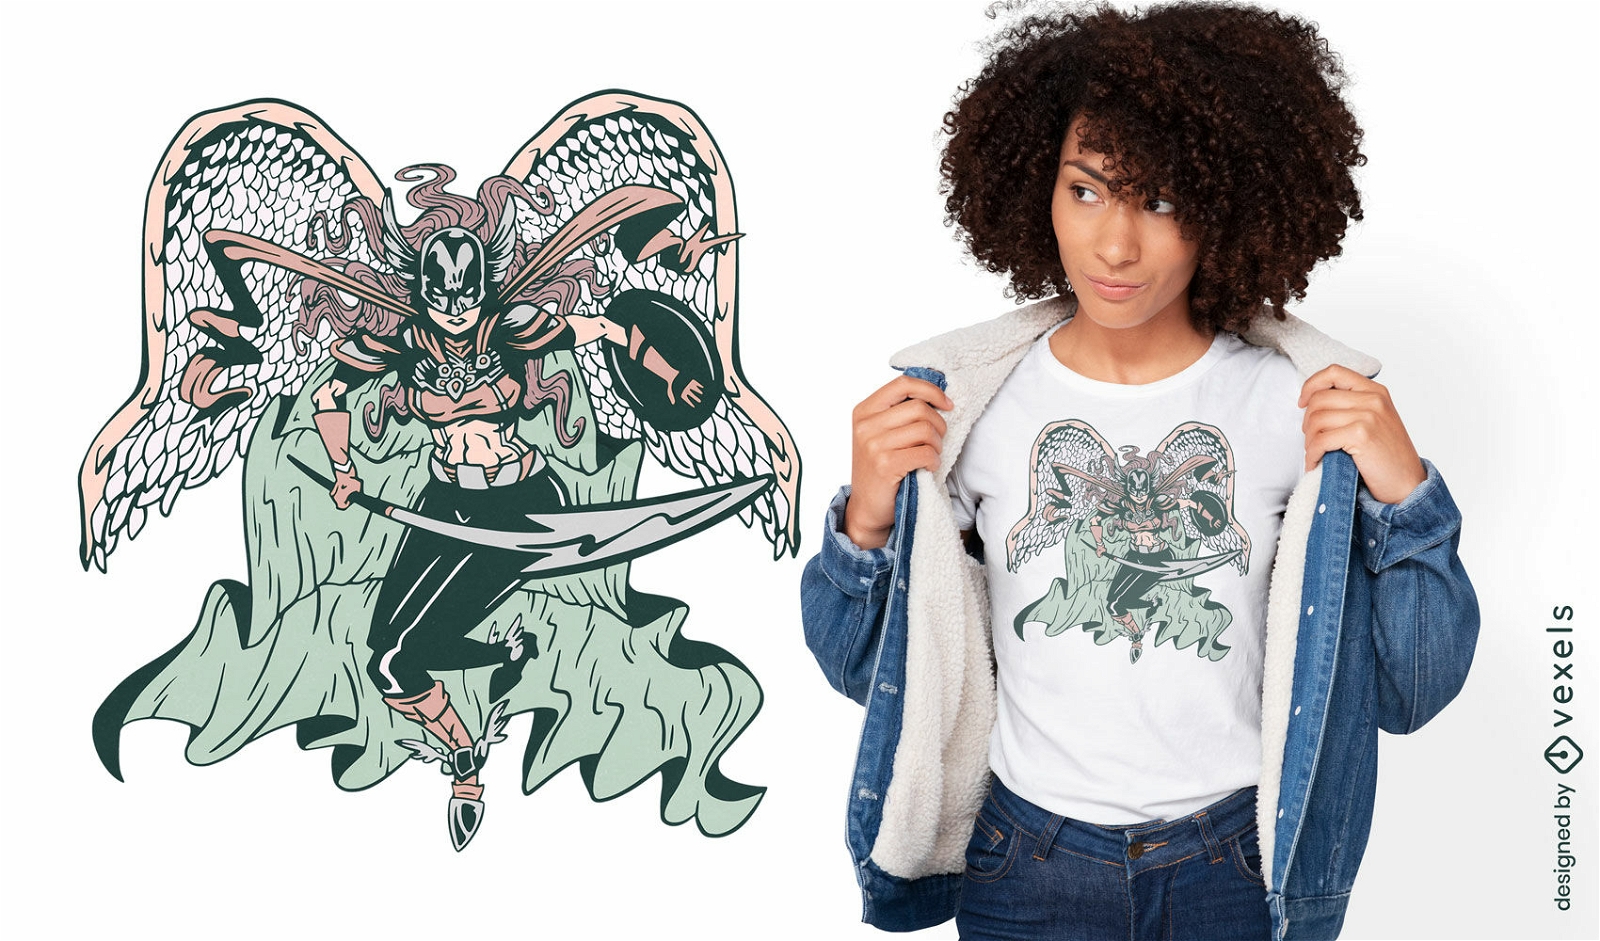 Valkyrie with wings fighting t-shirt design